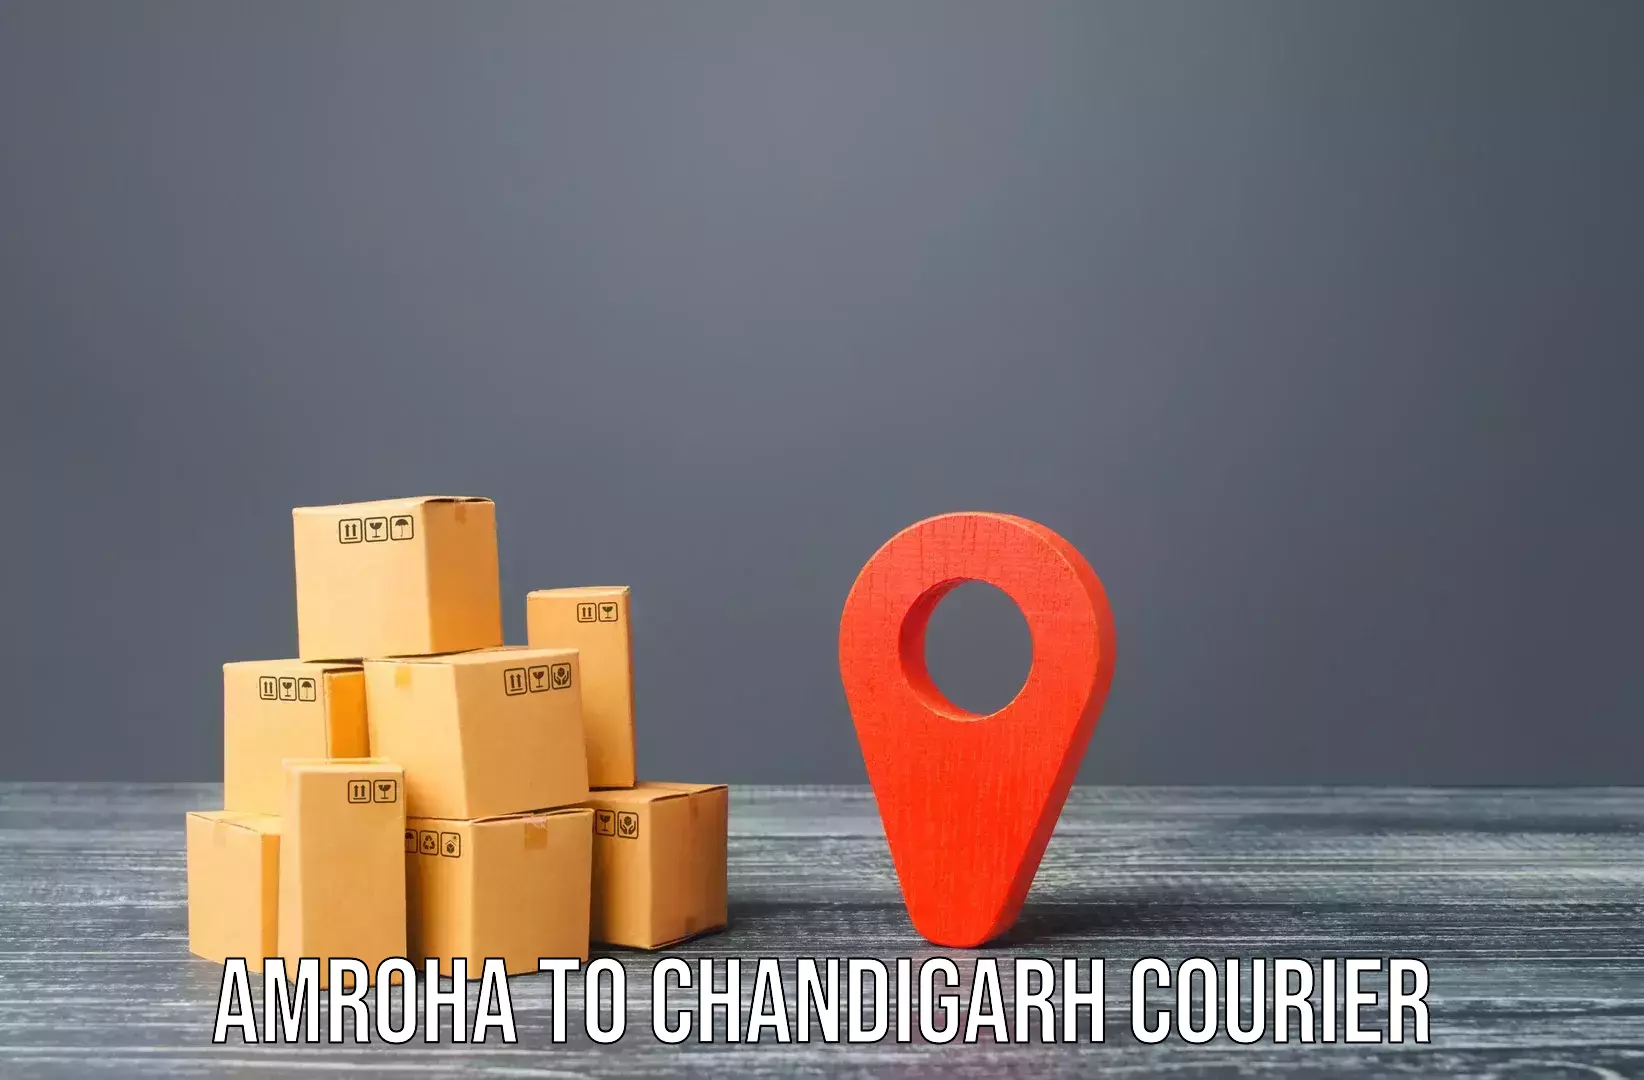 Moving service excellence Amroha to Chandigarh